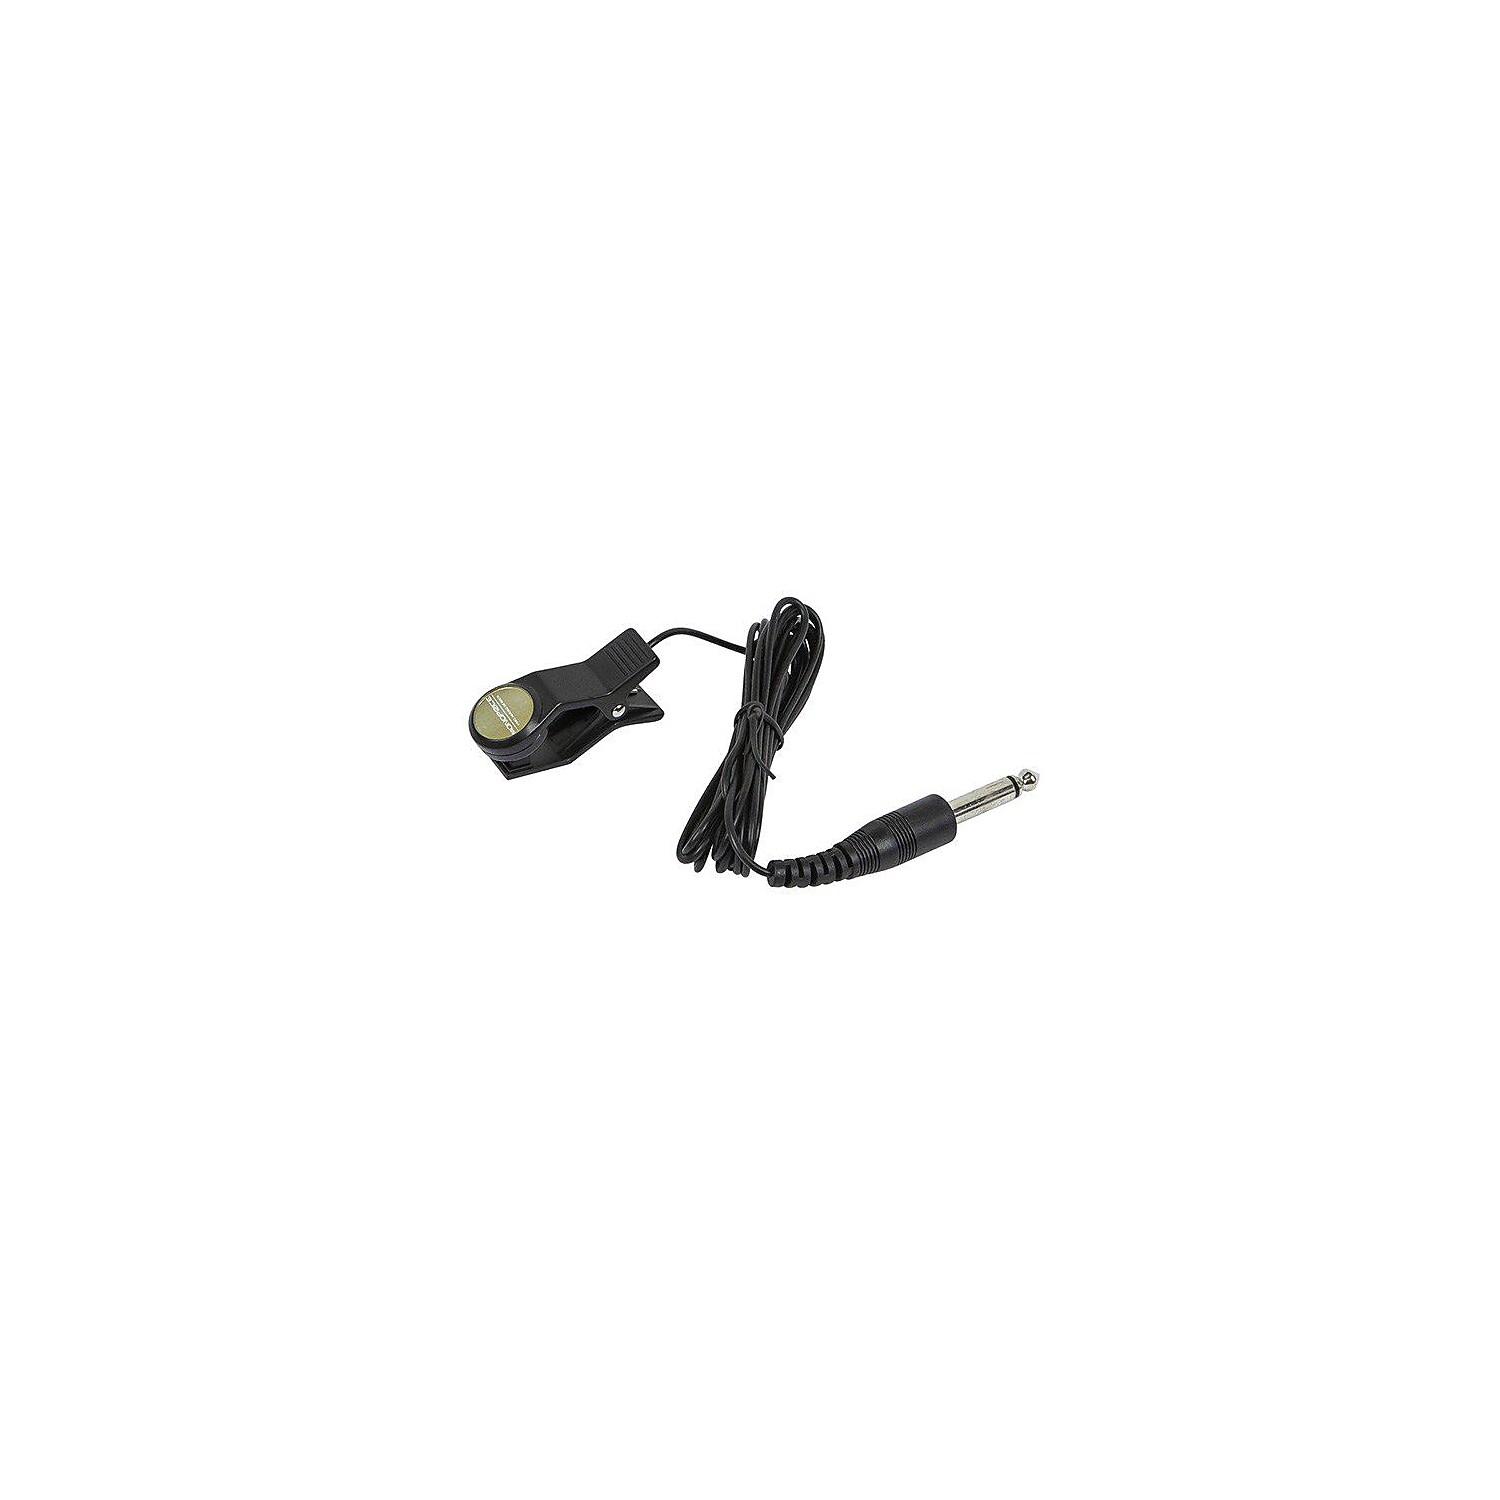 Monoprice Clip On Pickup - Black With 8 Inch Cable, 1/4 Staight Plug, Easy Tuning, Compatible With Acoustic Guitars , Cellos And Violins - image 1 of 2